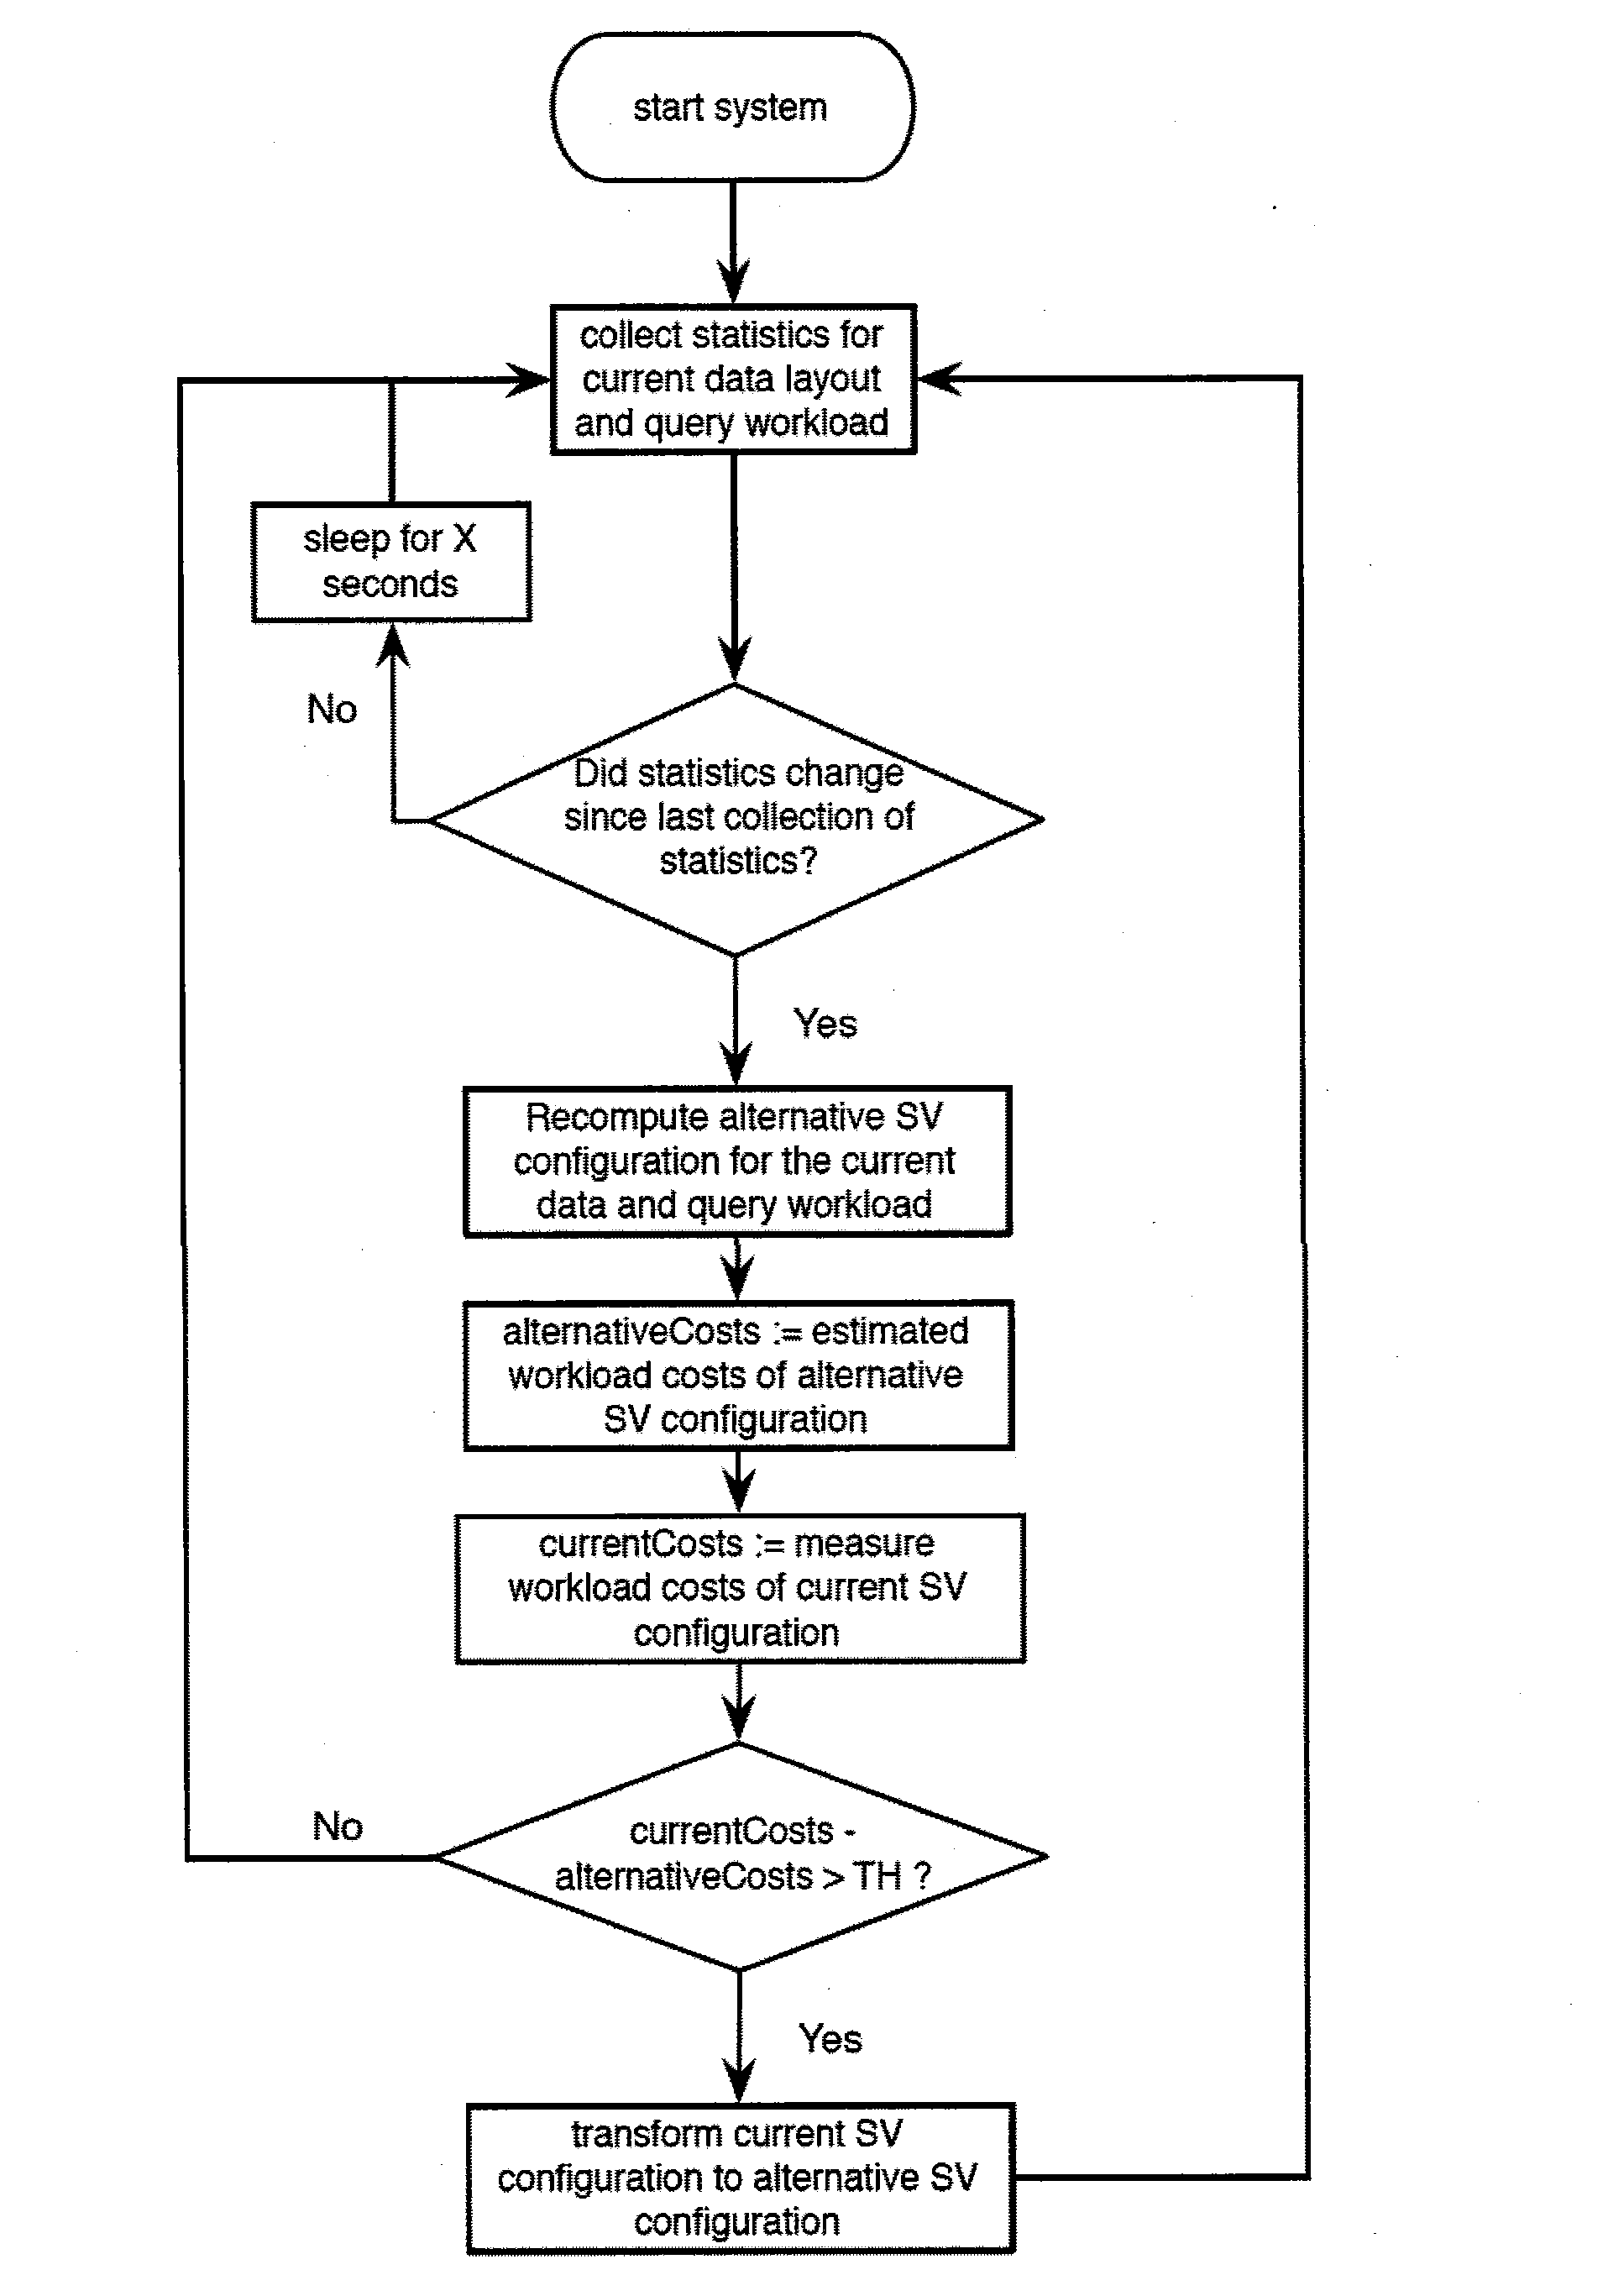 Method of Storing and Accessing Data in a Database System